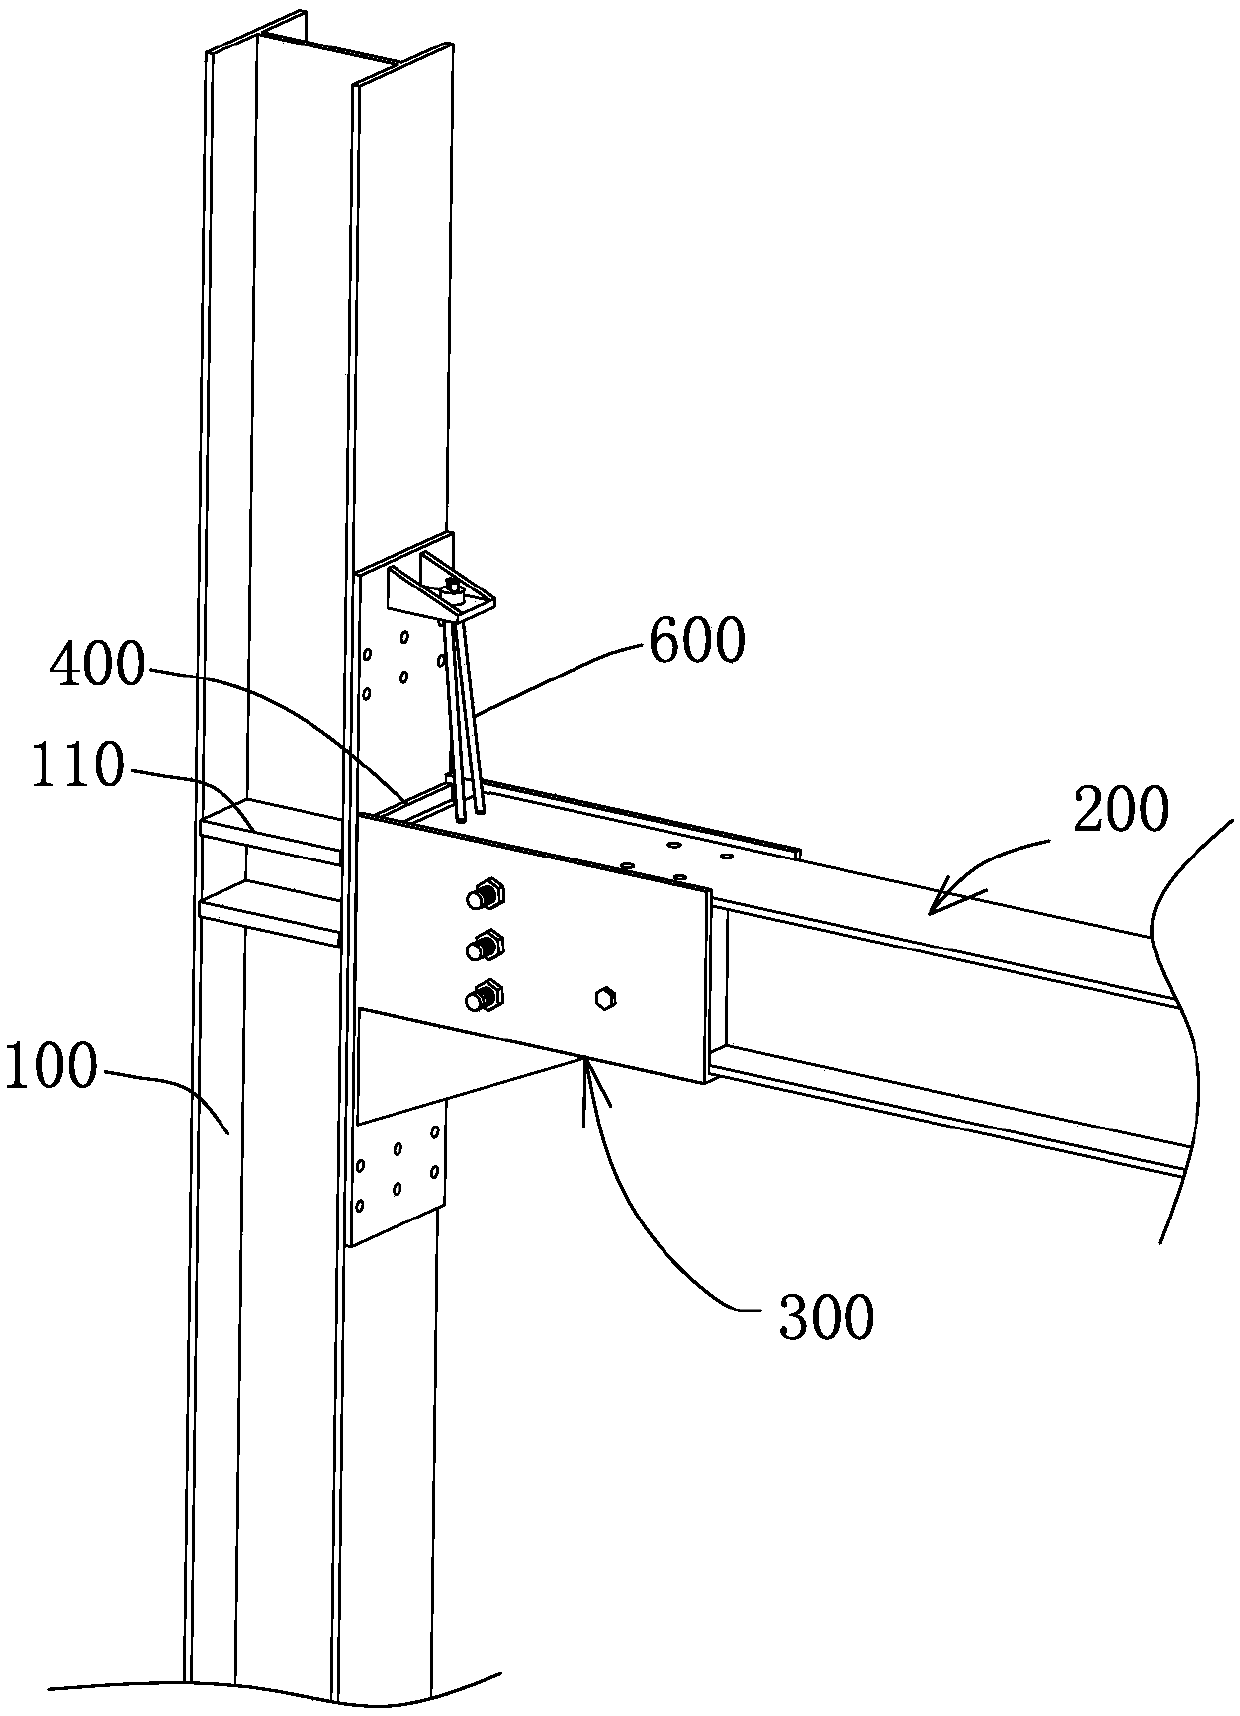 Beam-column seismic joints and their connection methods